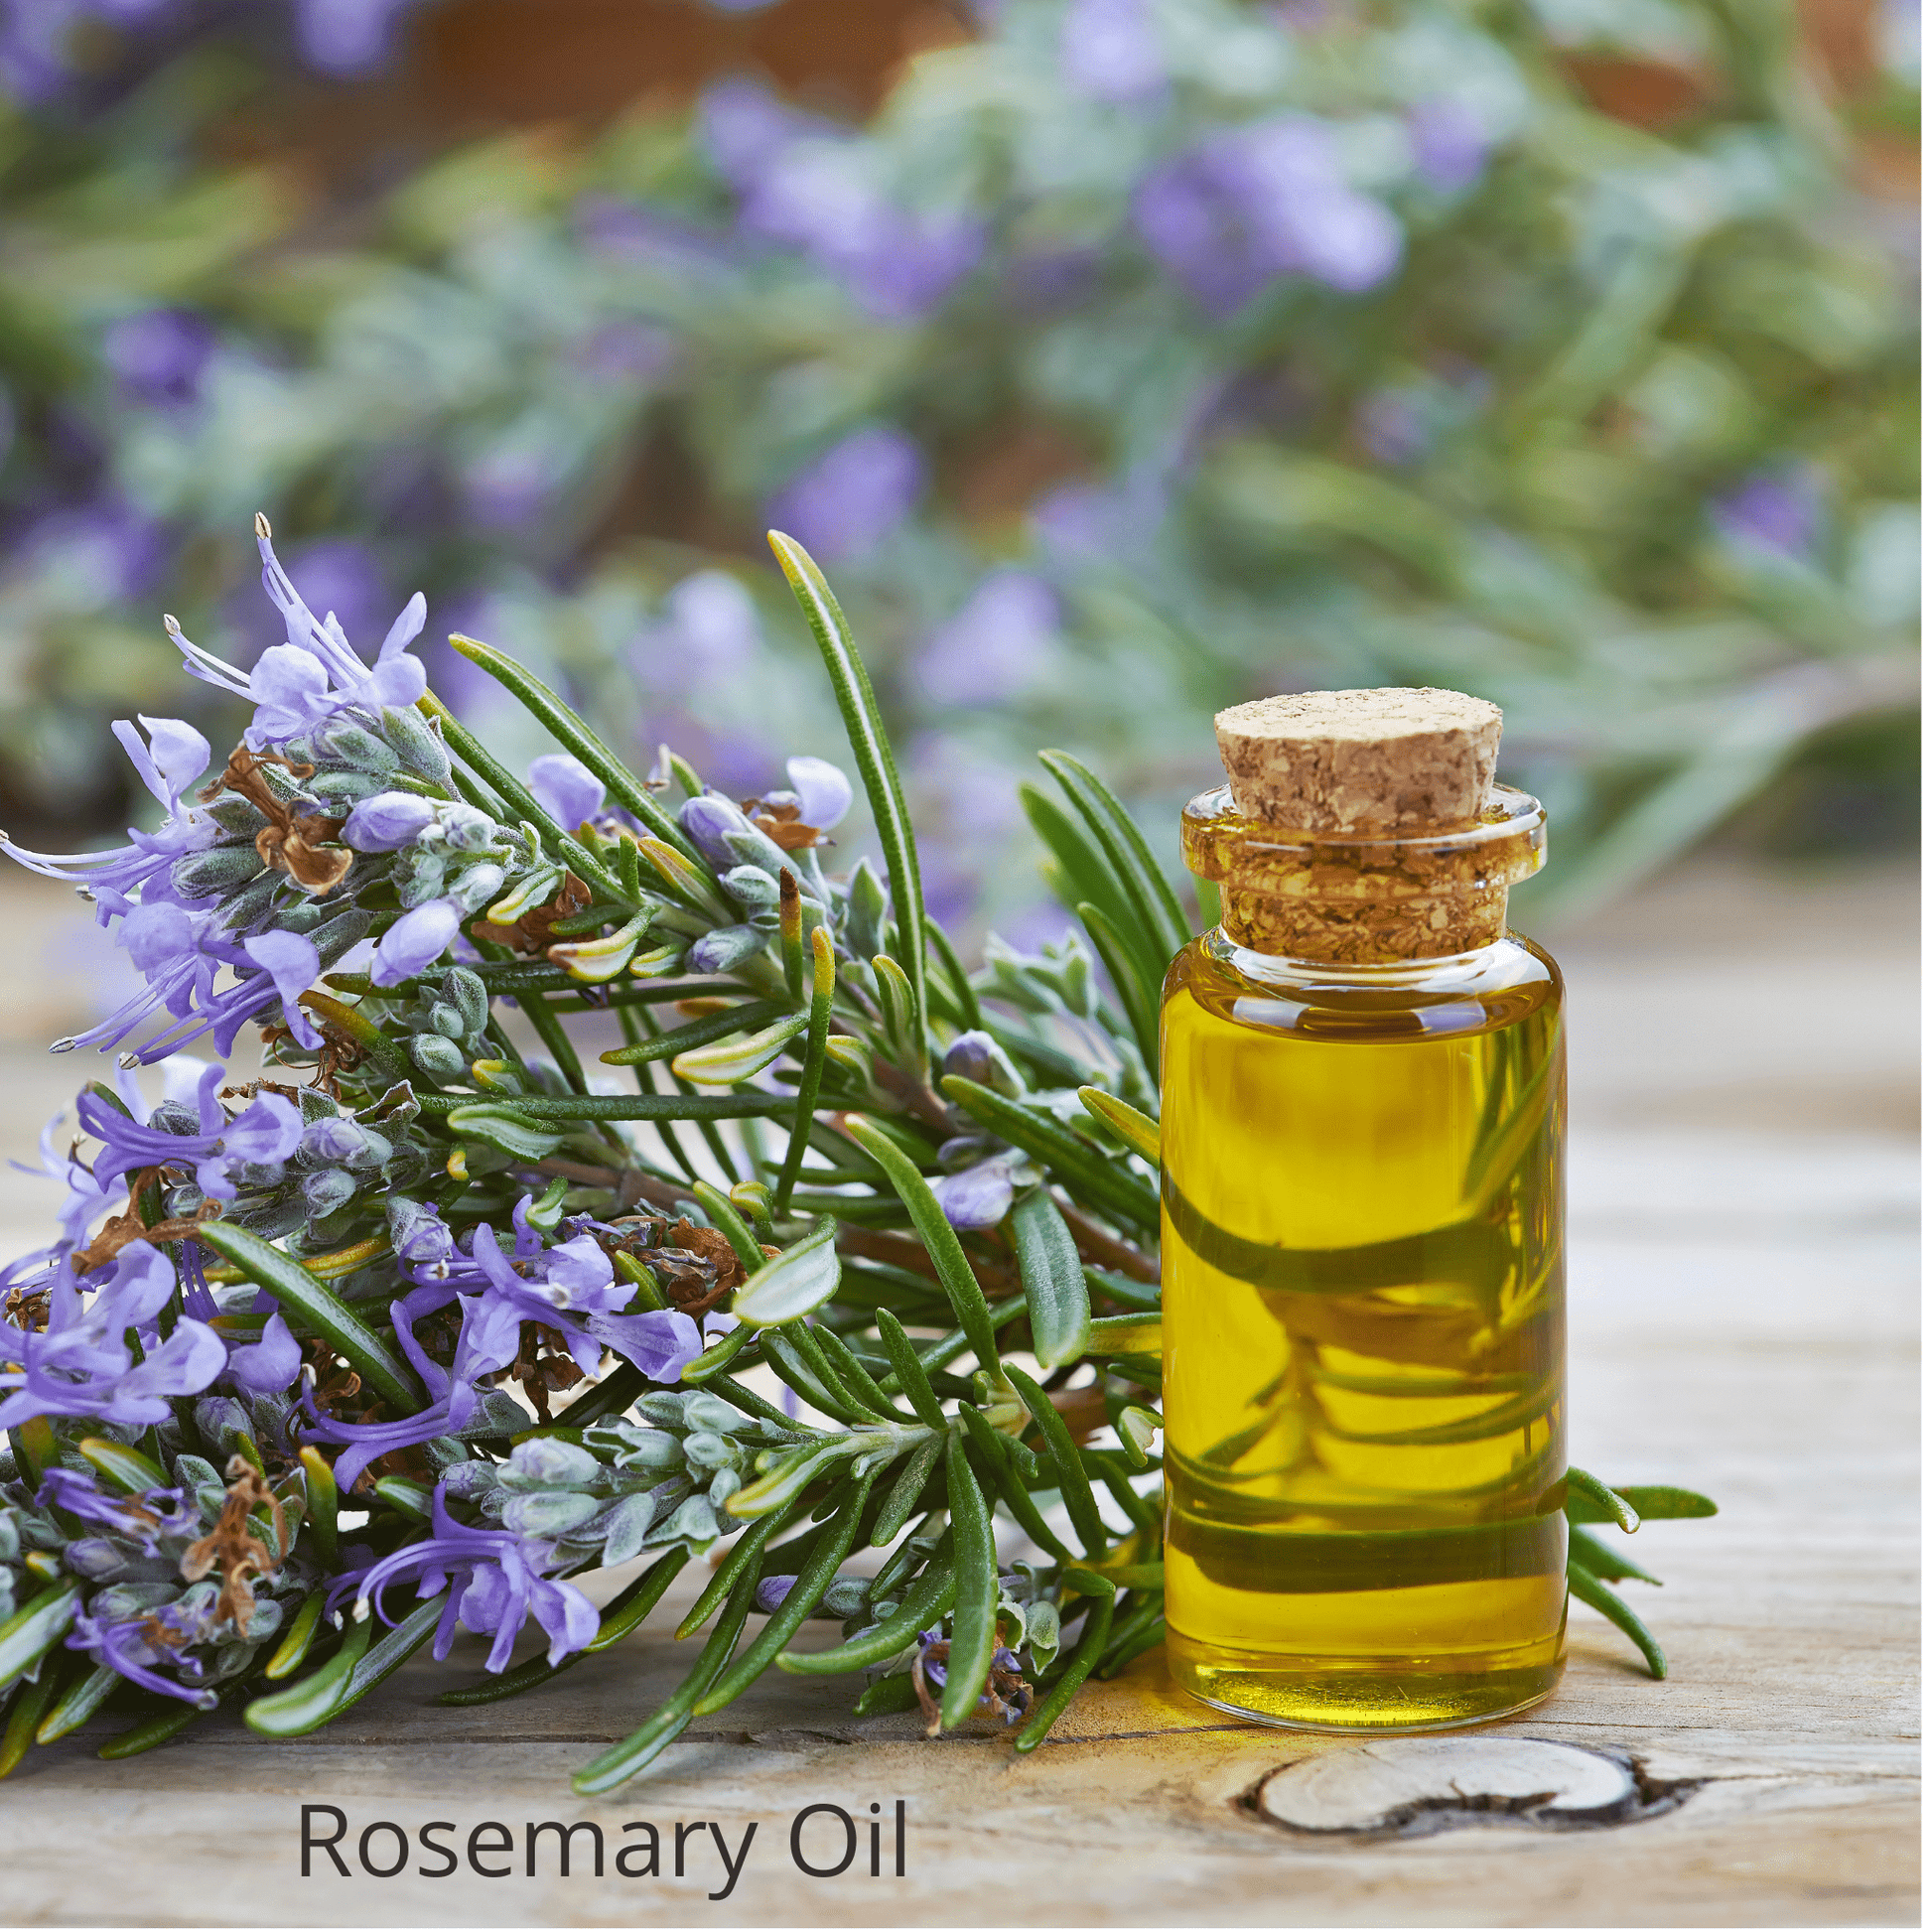 Be Green Bath and Body Deodorant contains rosemary essential oil